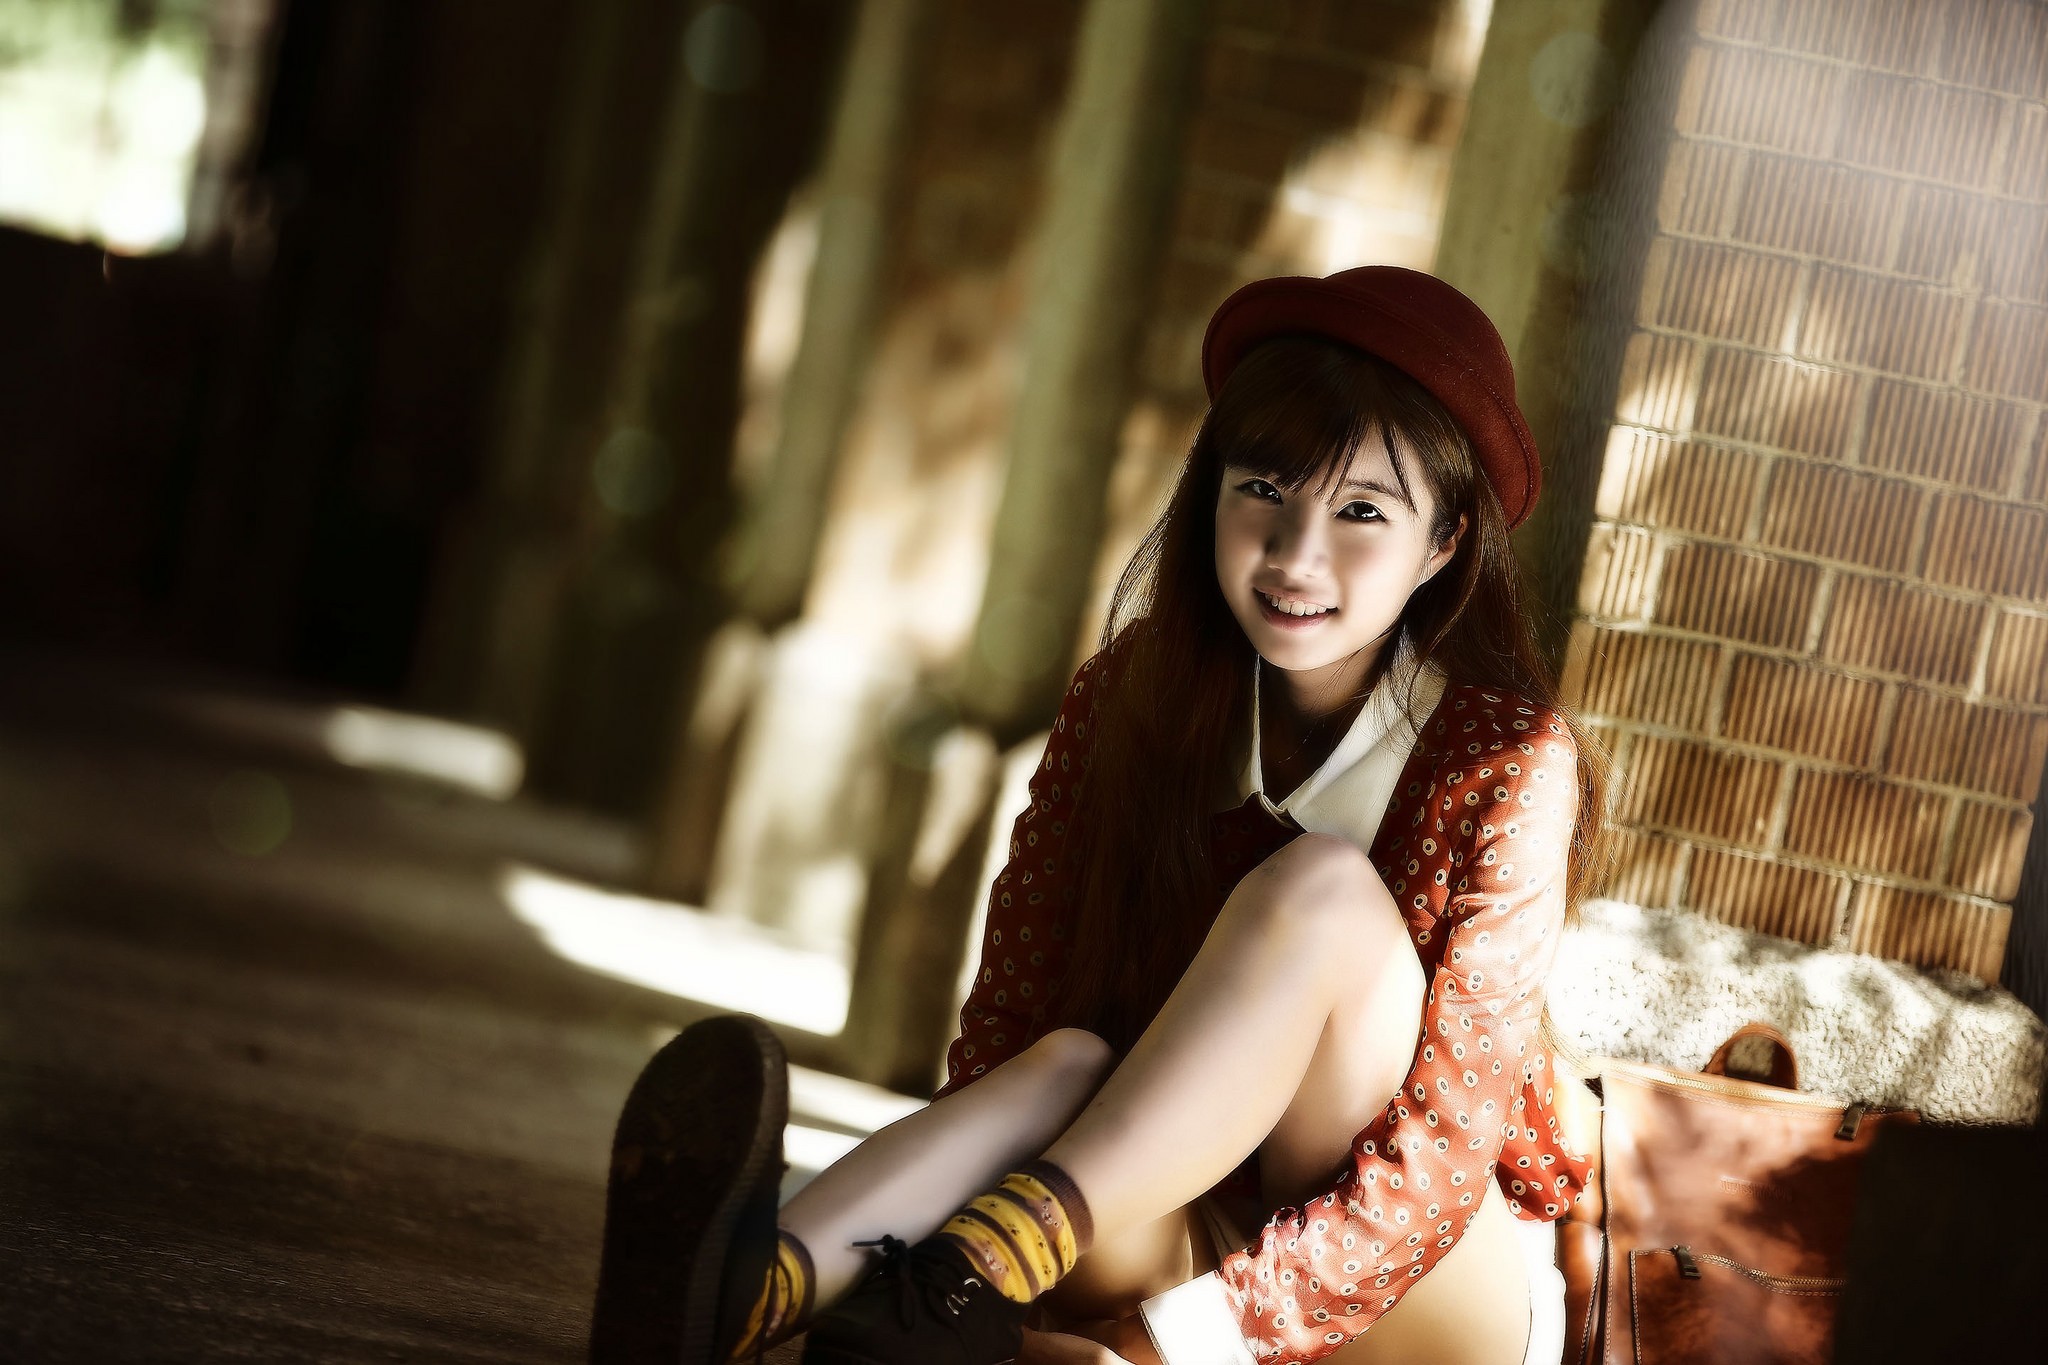 People 2048x1365 smiling hat model millinery long hair brunette sitting women Asian shoes legs women indoors indoors women with hats red clothing